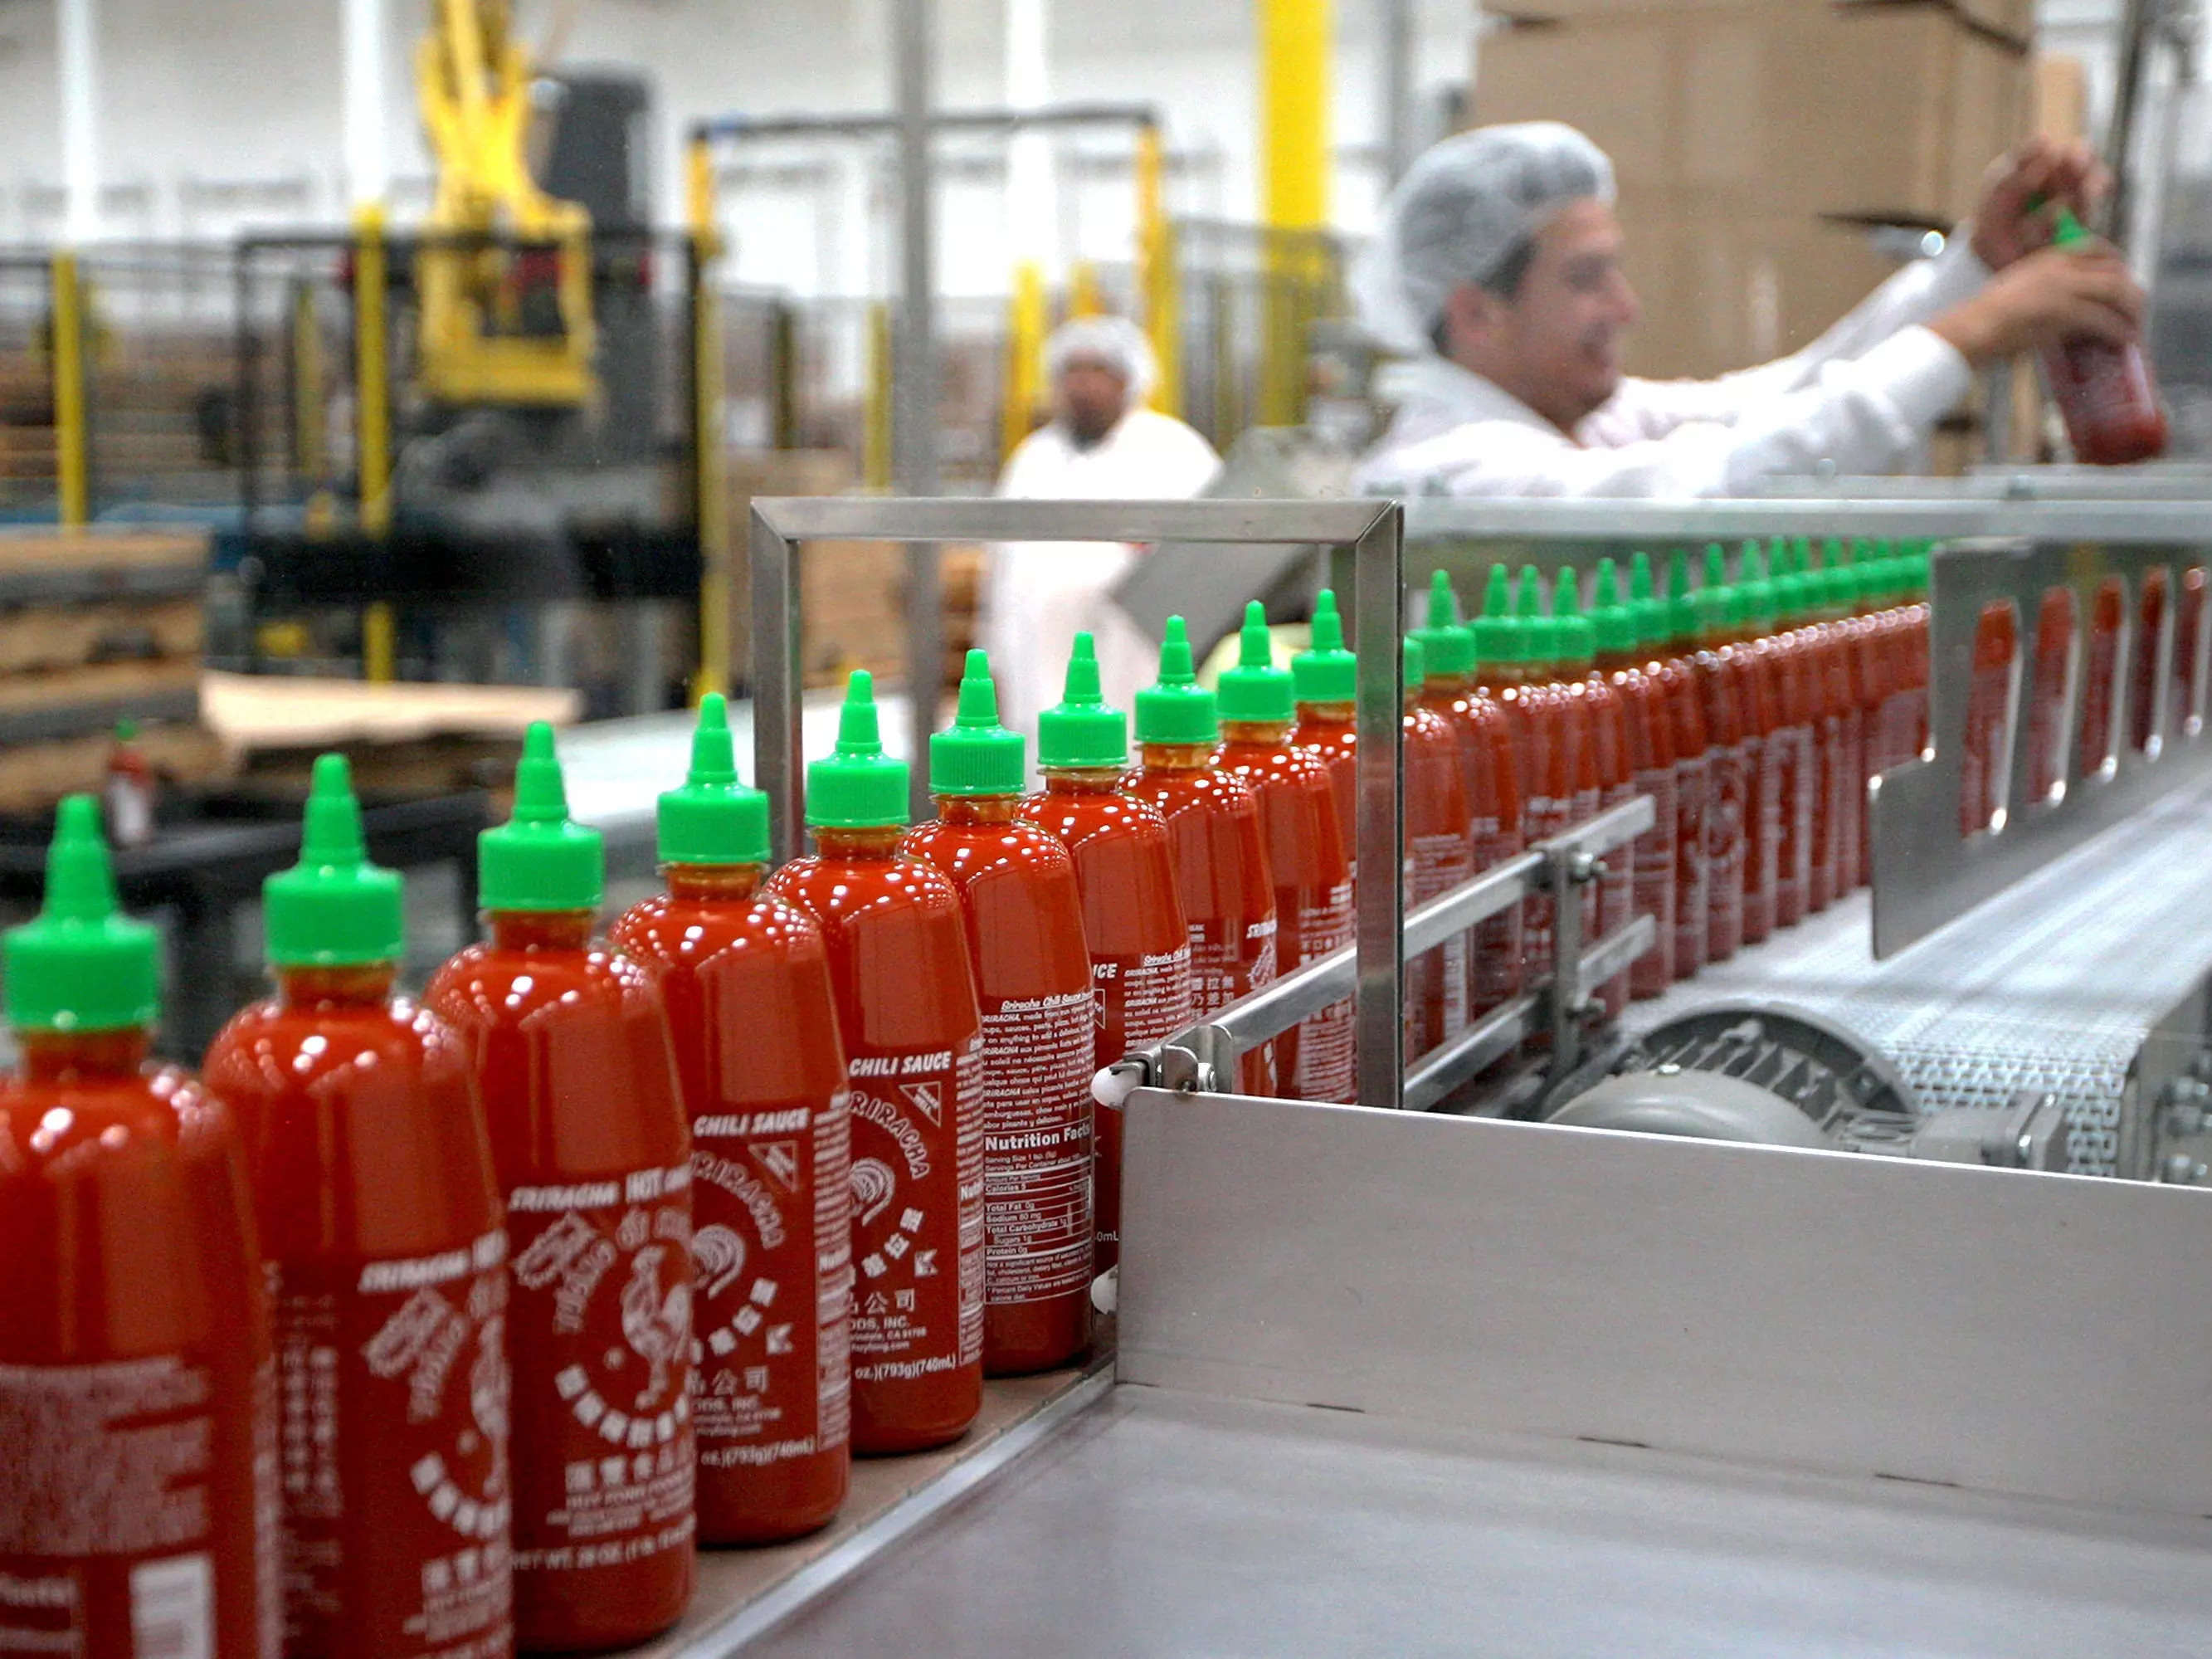 Sriracha Hot Chili Sauce is bottled at the Huy Fong Foods plant on May 14, 2014 in Irwindale, California.